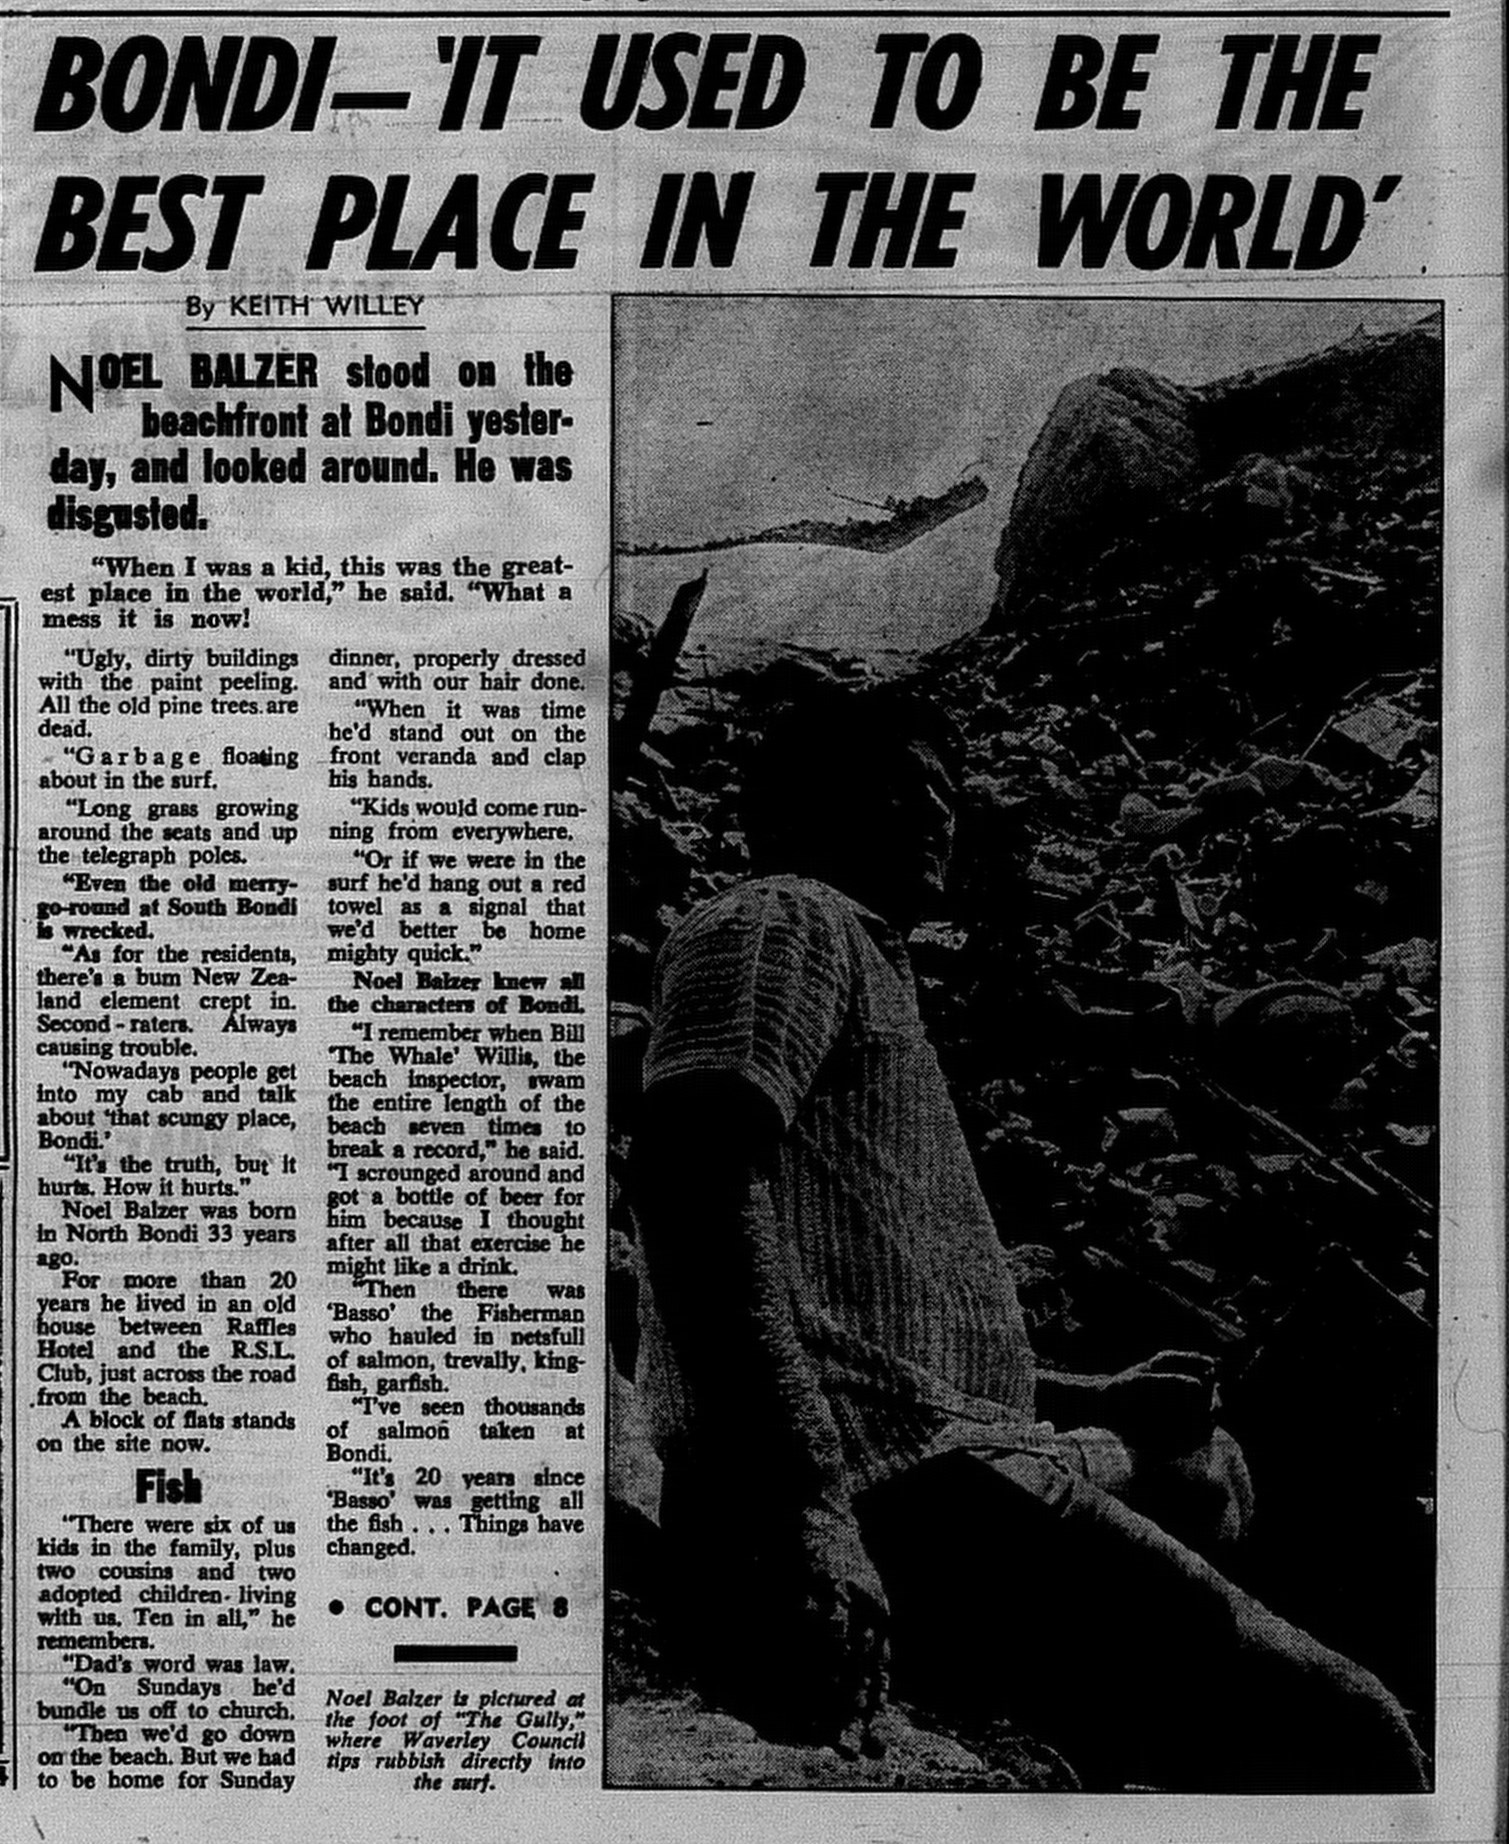 Bondi Beach Feature March 6 1970 The Sun 4 (Page 8 missing)